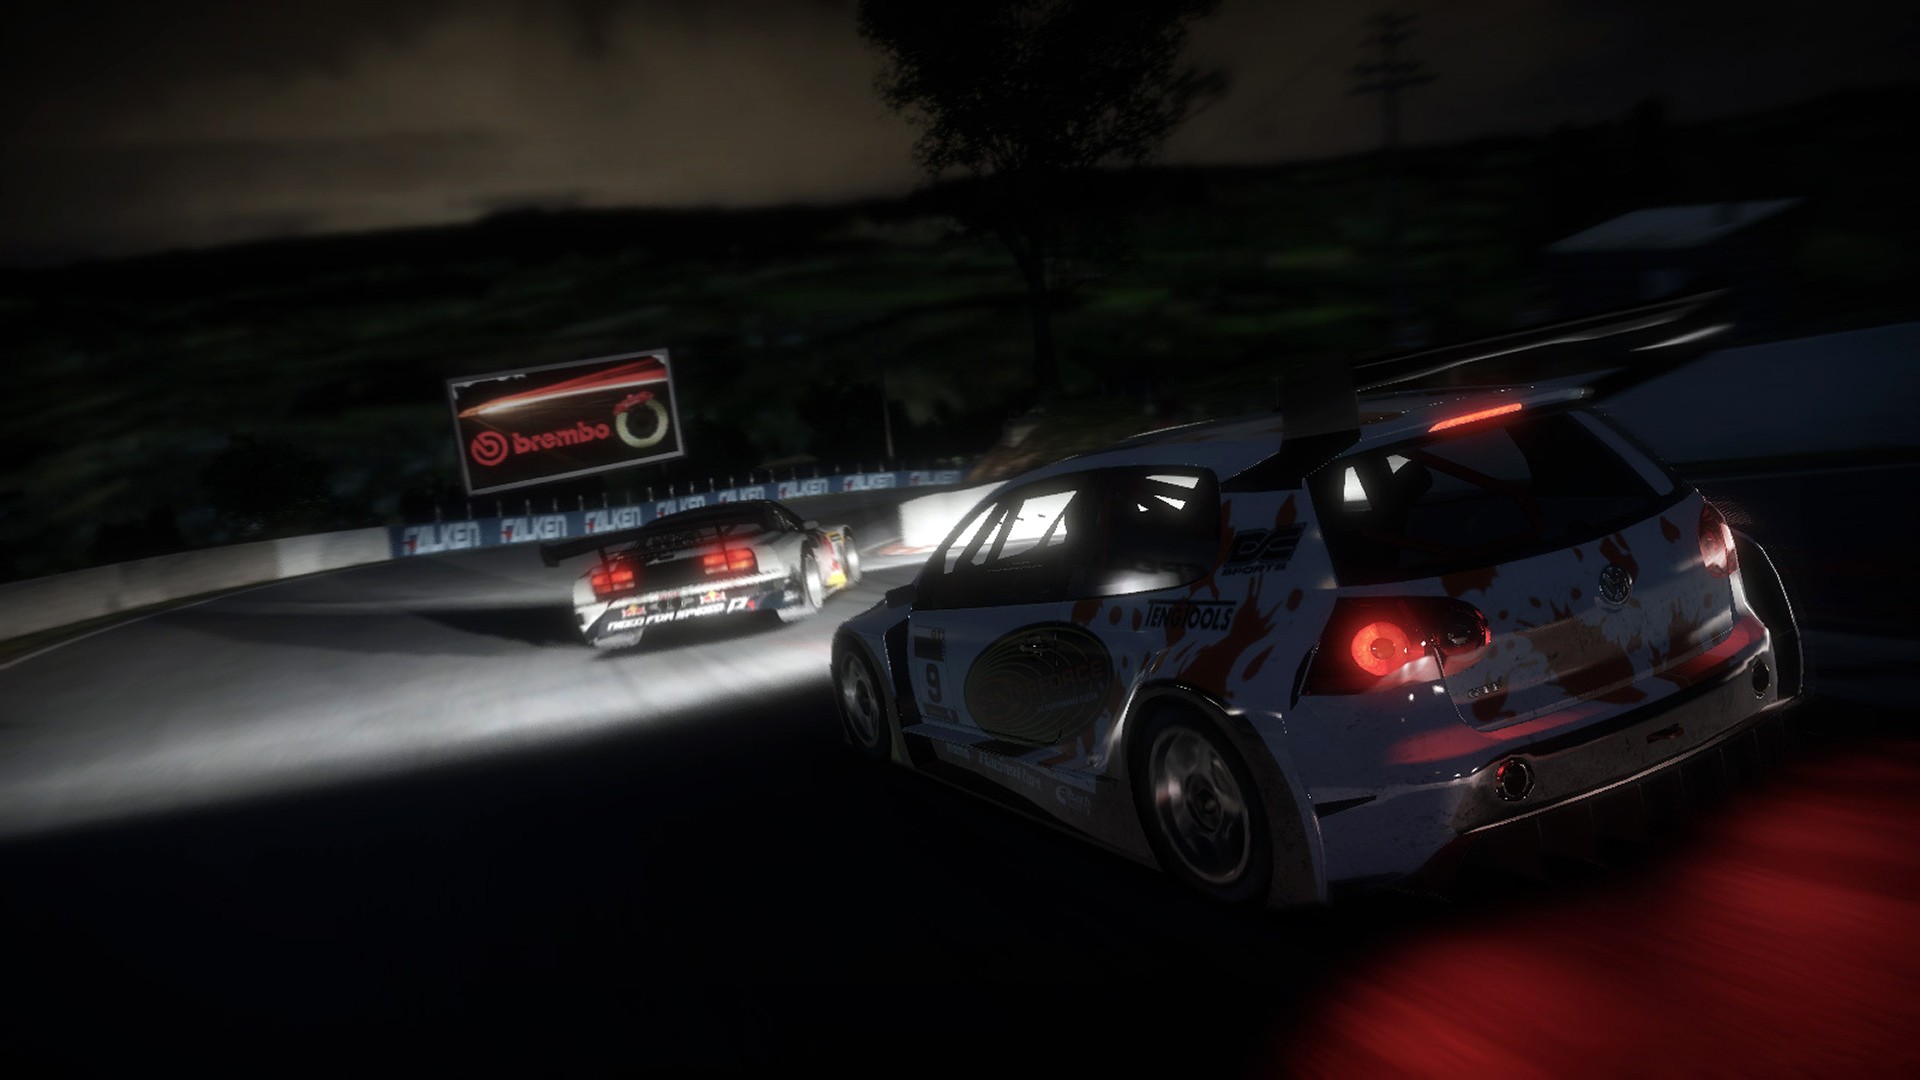 video games, cars, games, Need For Speed Shift 2: Unleashed, Volkwagen Golf GTI R32, pc games - desktop wallpaper